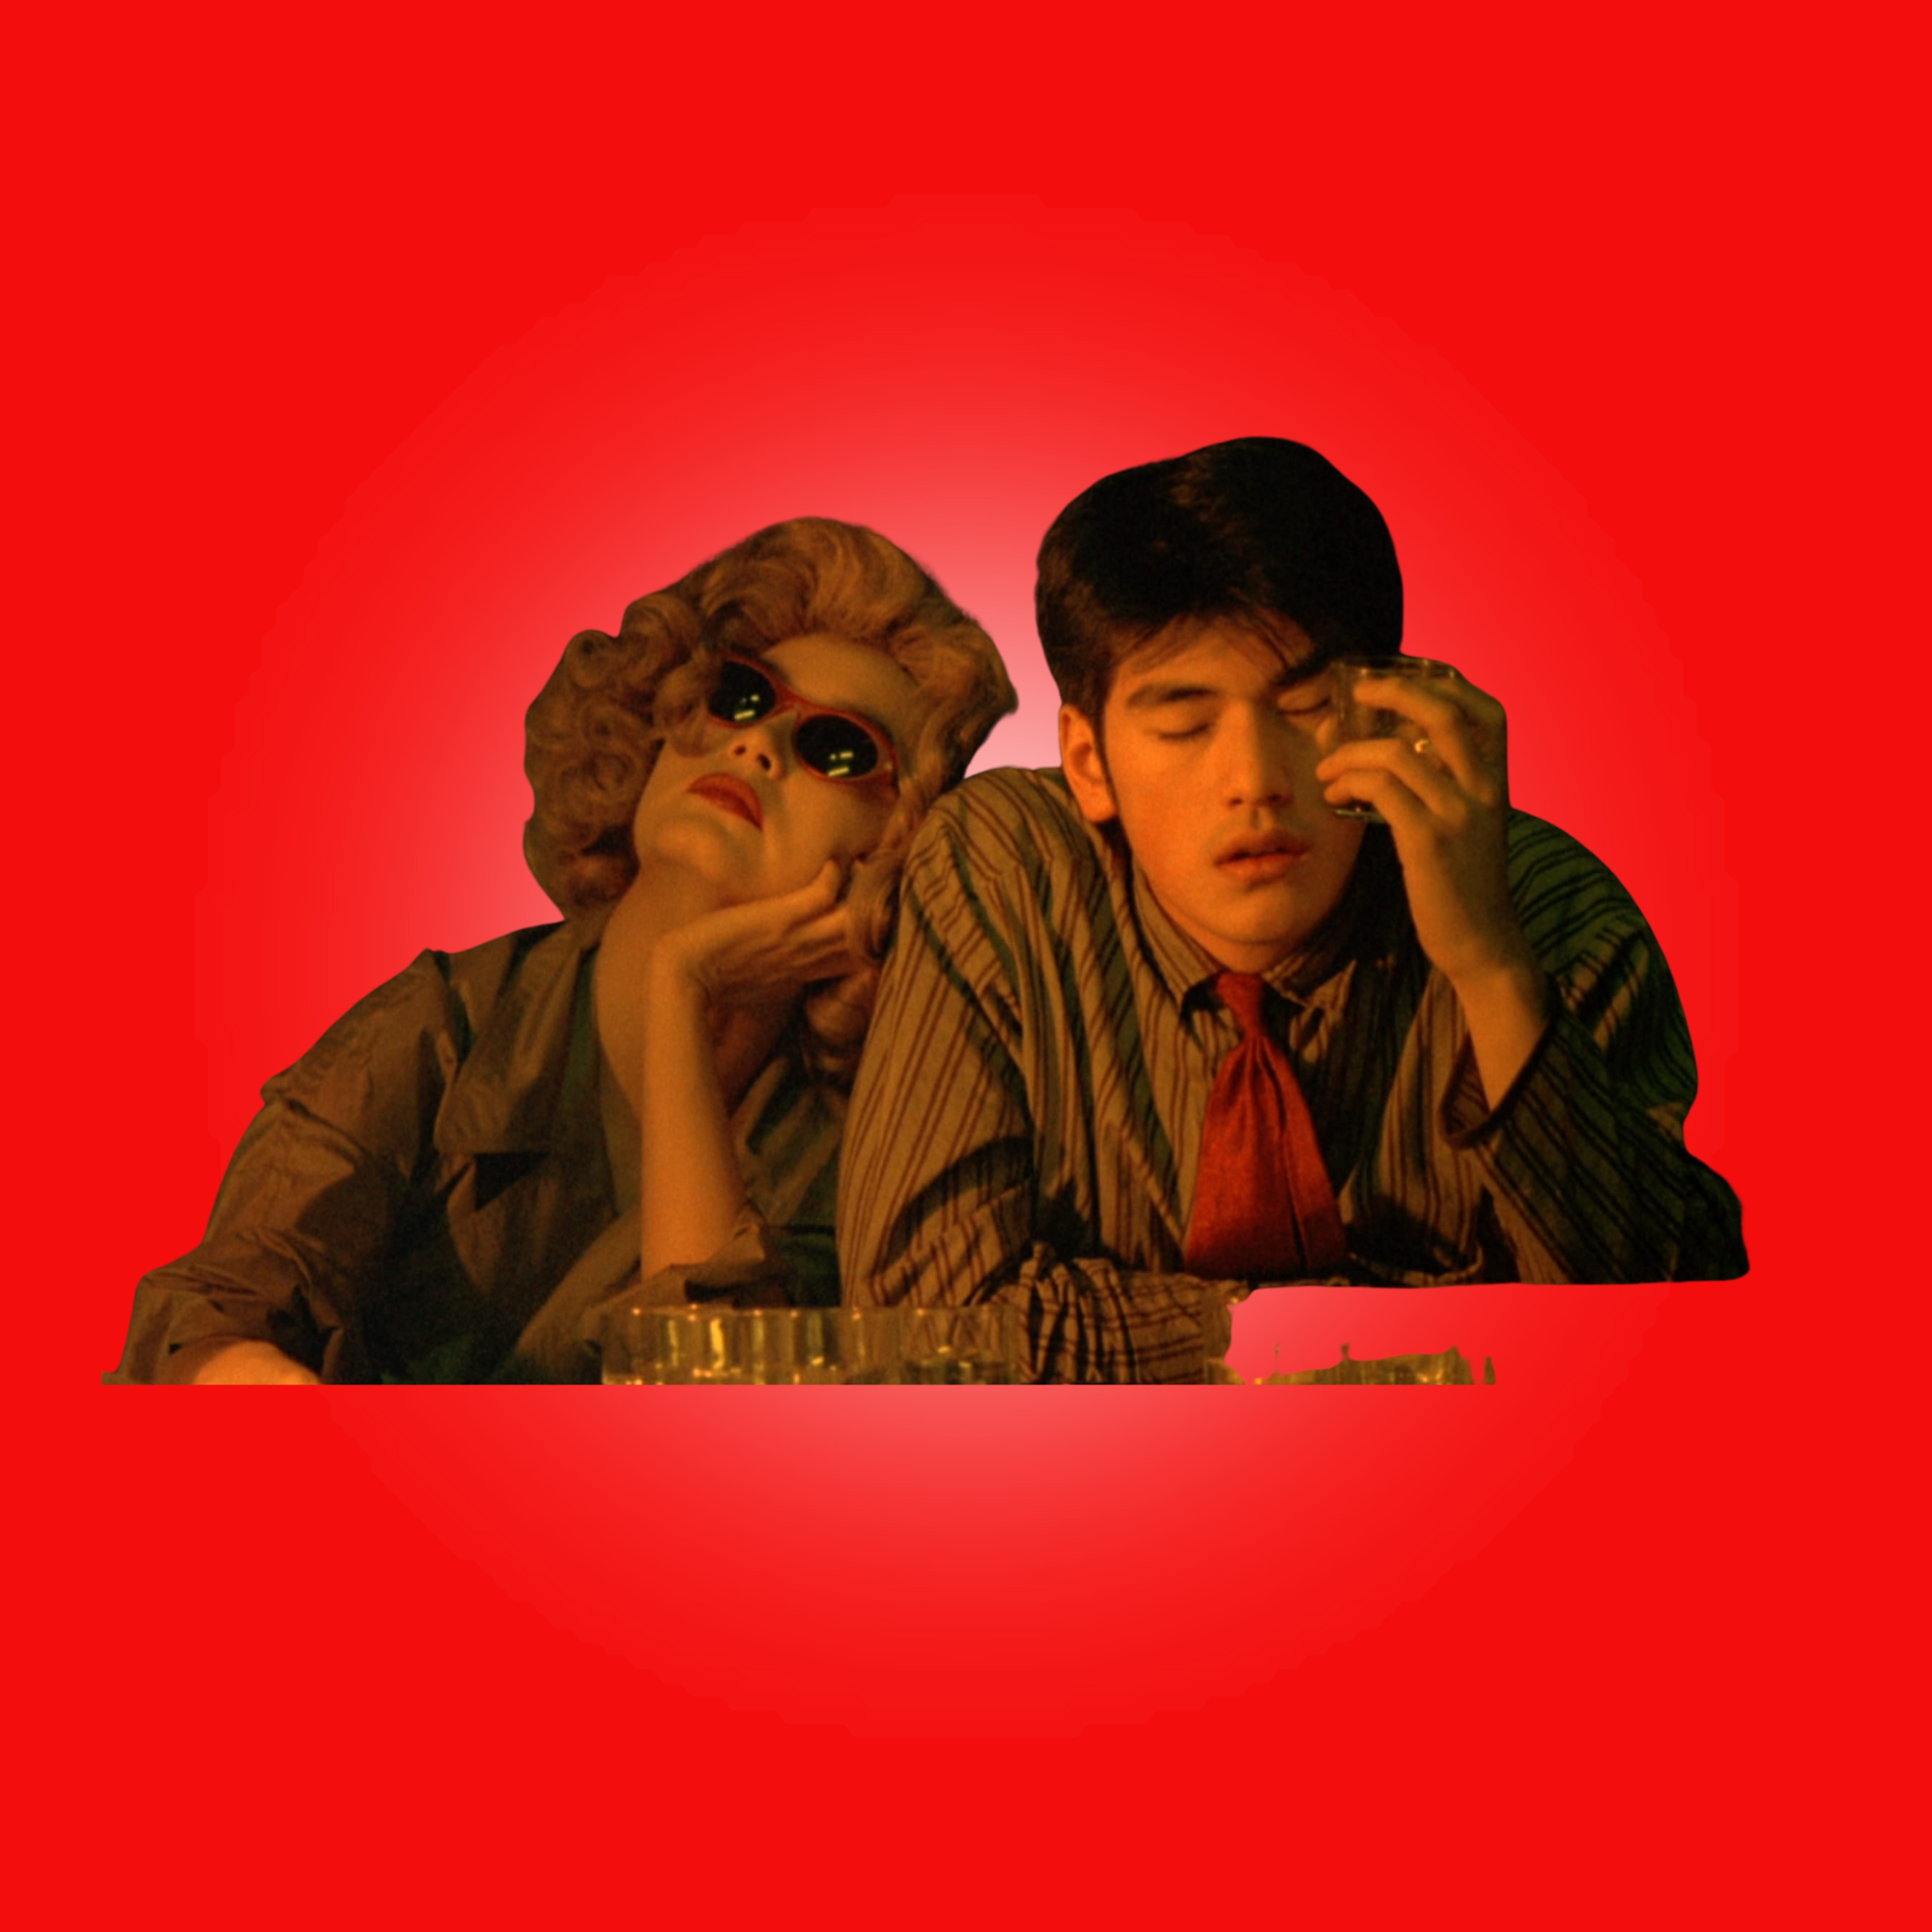 A Playlist for Pretending your Life is a Wong Kar-Wai Movie